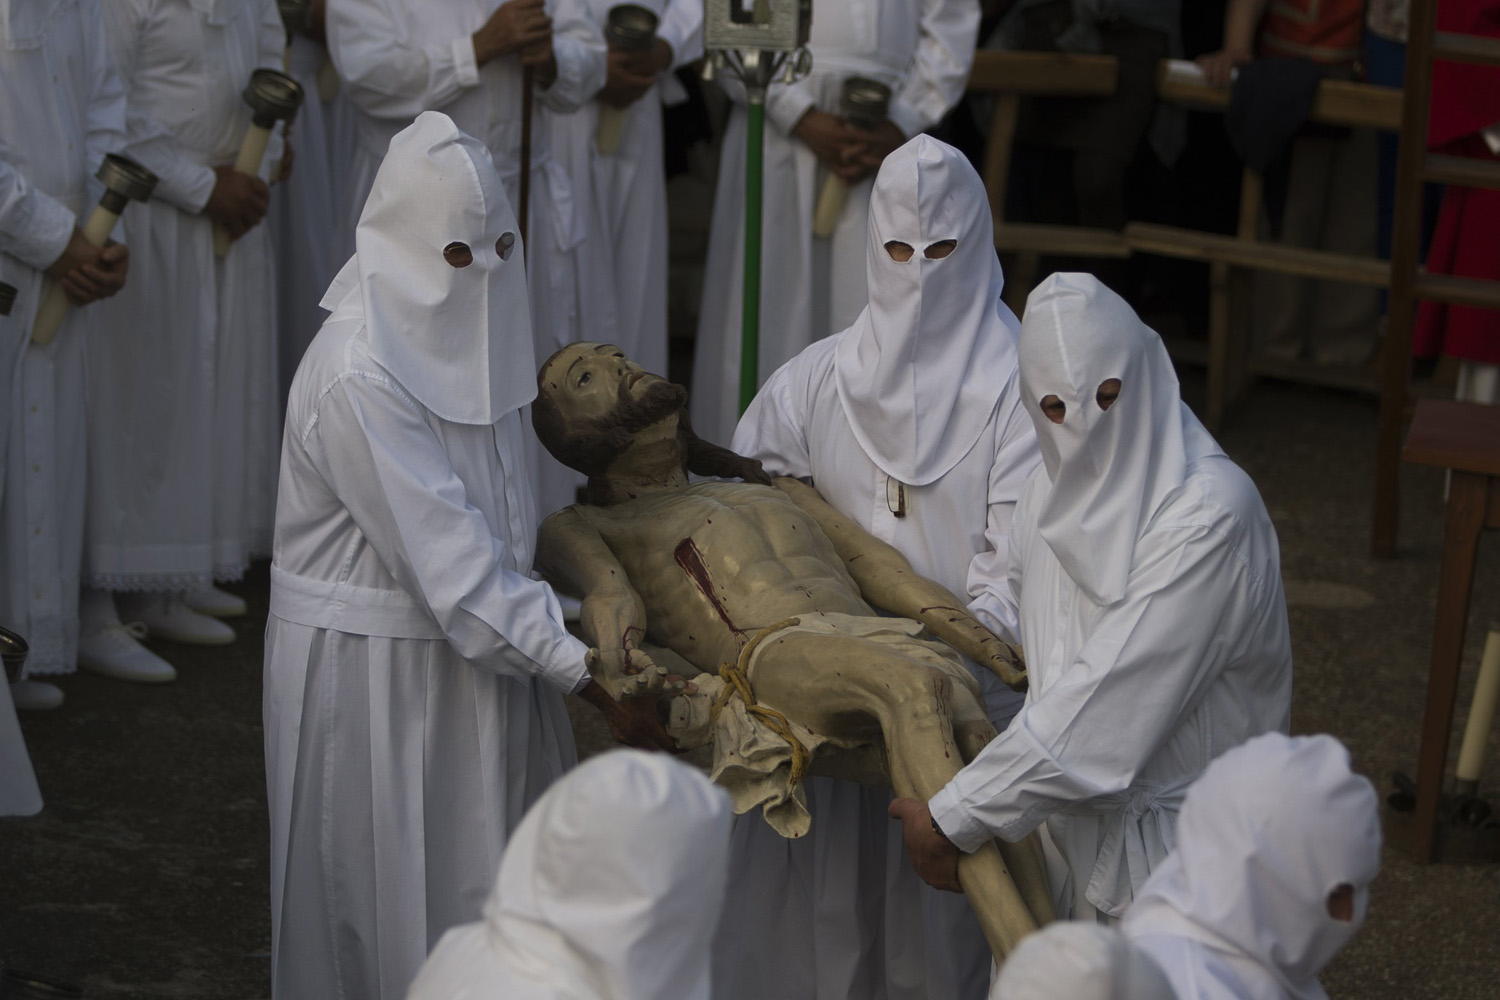 Penitents take part in a procession of  Santo Cristo  during the Holy Week in Bercianos de Aliste, northern Spain, Friday, April 18, 2014.